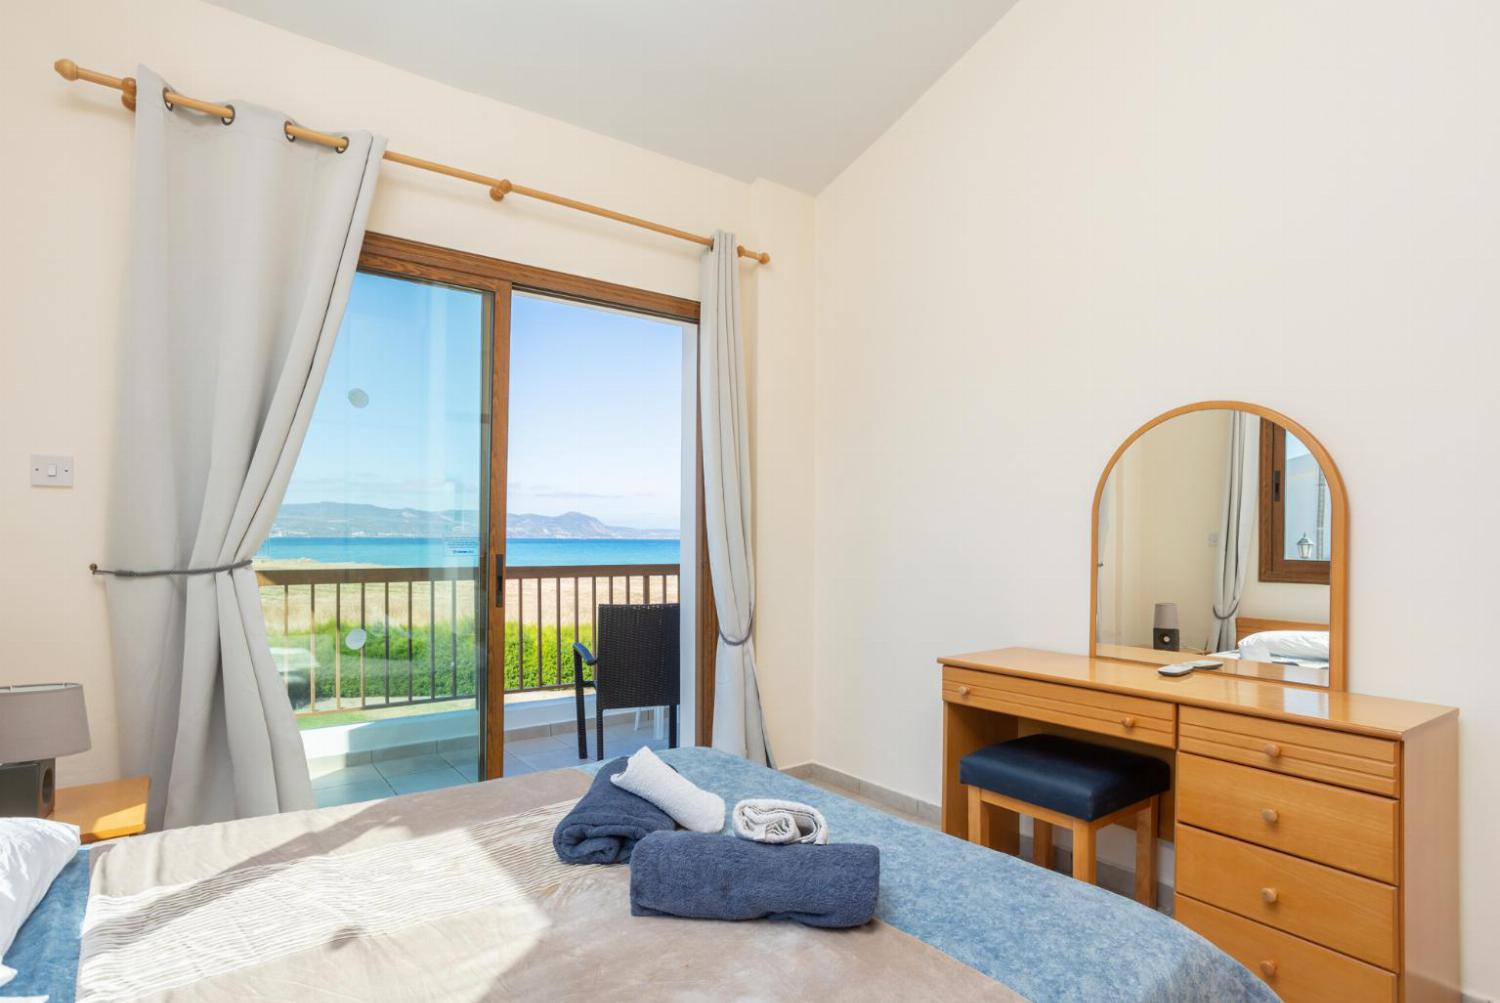 Double bedroom with A/C, sea views, and balcony access